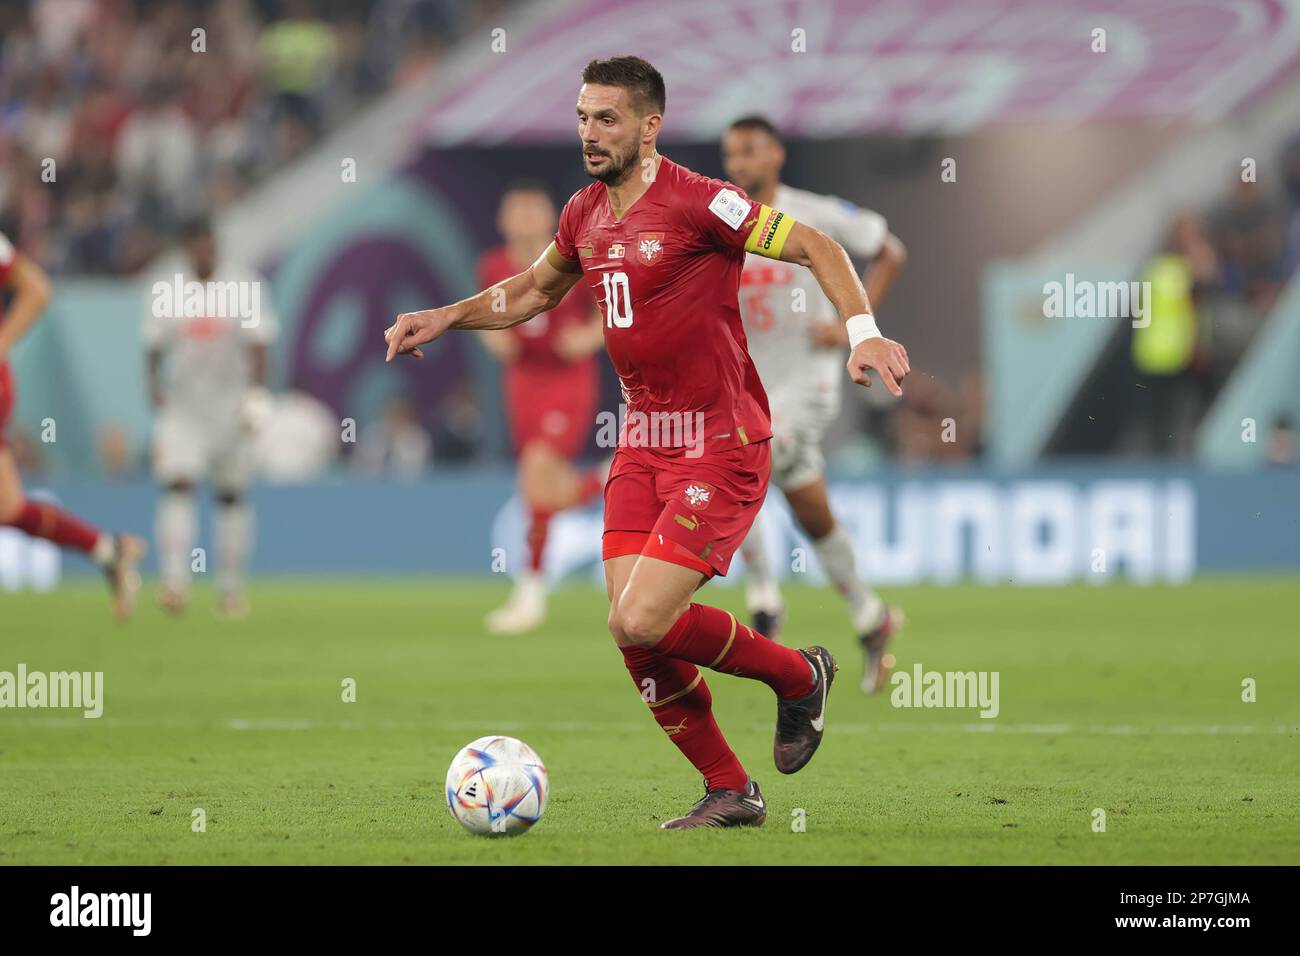 Dusan Tadic of Serbia in action during the FIFA World Cup Qatar 2022 match between Serbia and Switzerland at Stadium 974. Final score; Serbia 2:3 Switzerland. Stock Photo